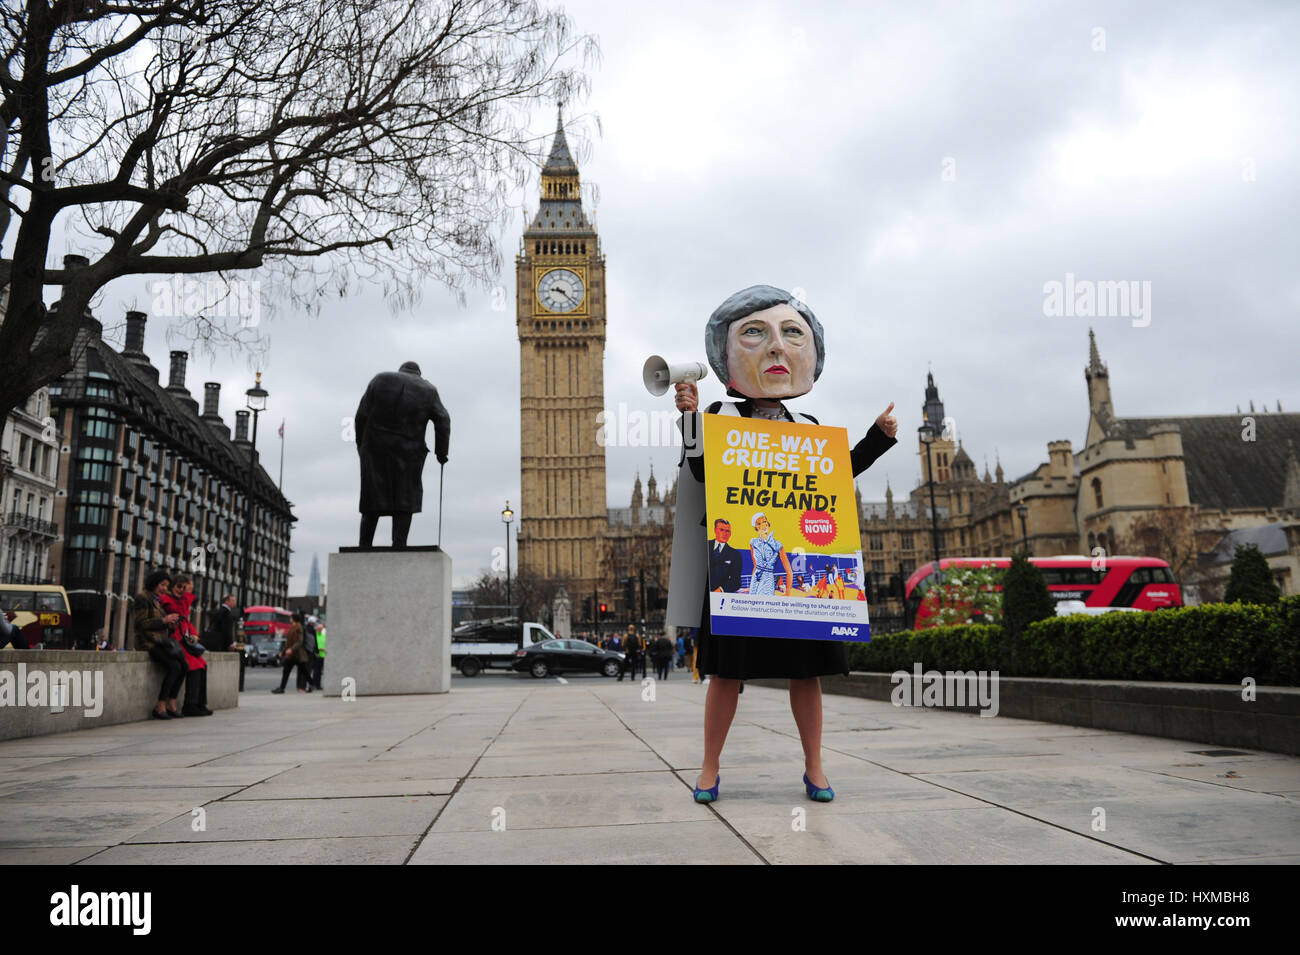 PABEST A giant headed Theresa May in Parliament Square, London during a protest by Avaaz after PM signed a letter to trigger Article 50 that starts the formal exit process by the UK from the European Union. Stock Photo